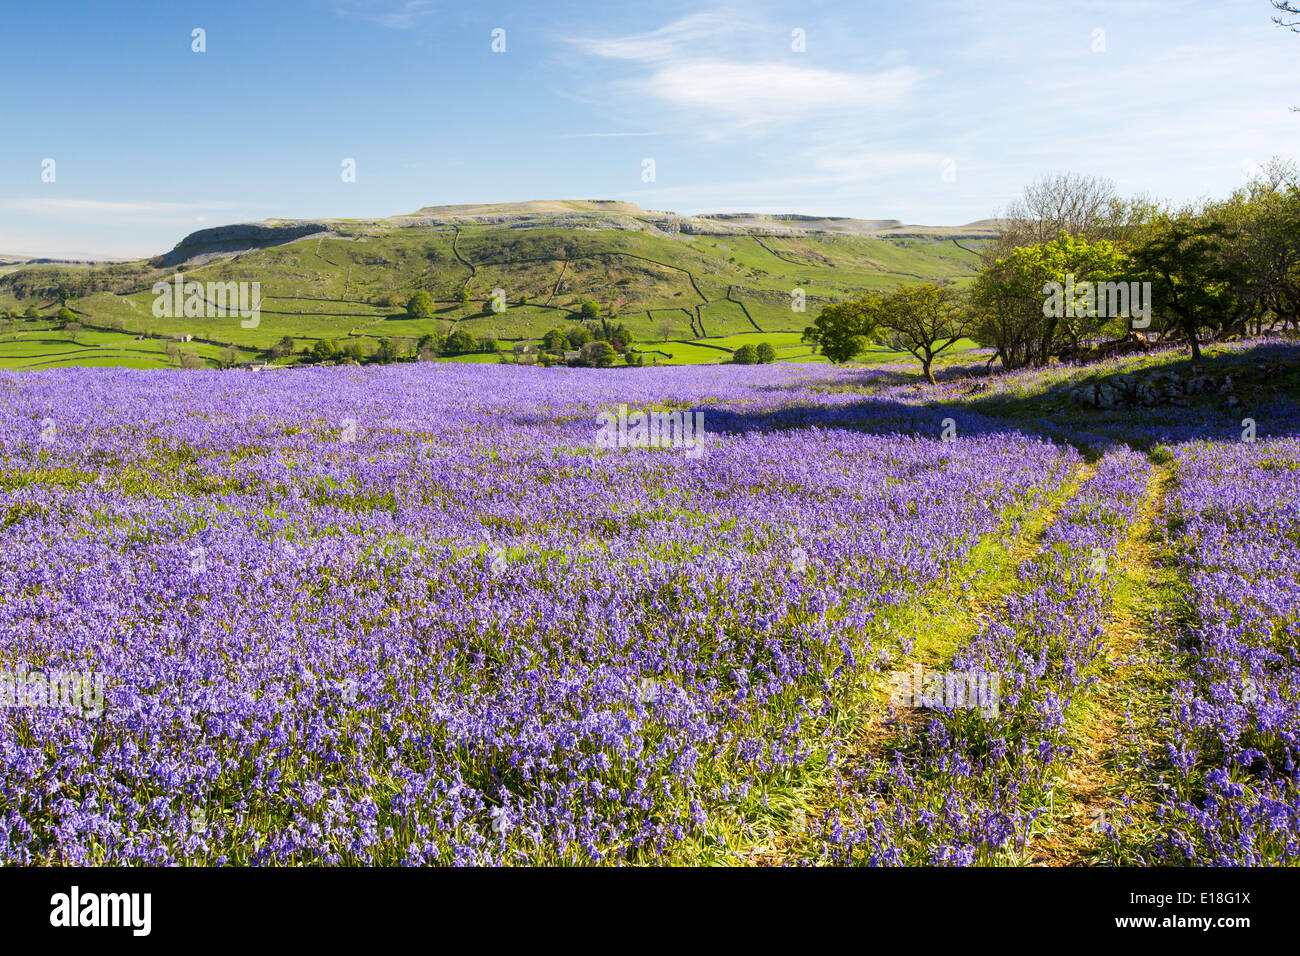 Bluebells growing on a limestone hill in the Yorkshire Dales National Park, UK. Stock Photo